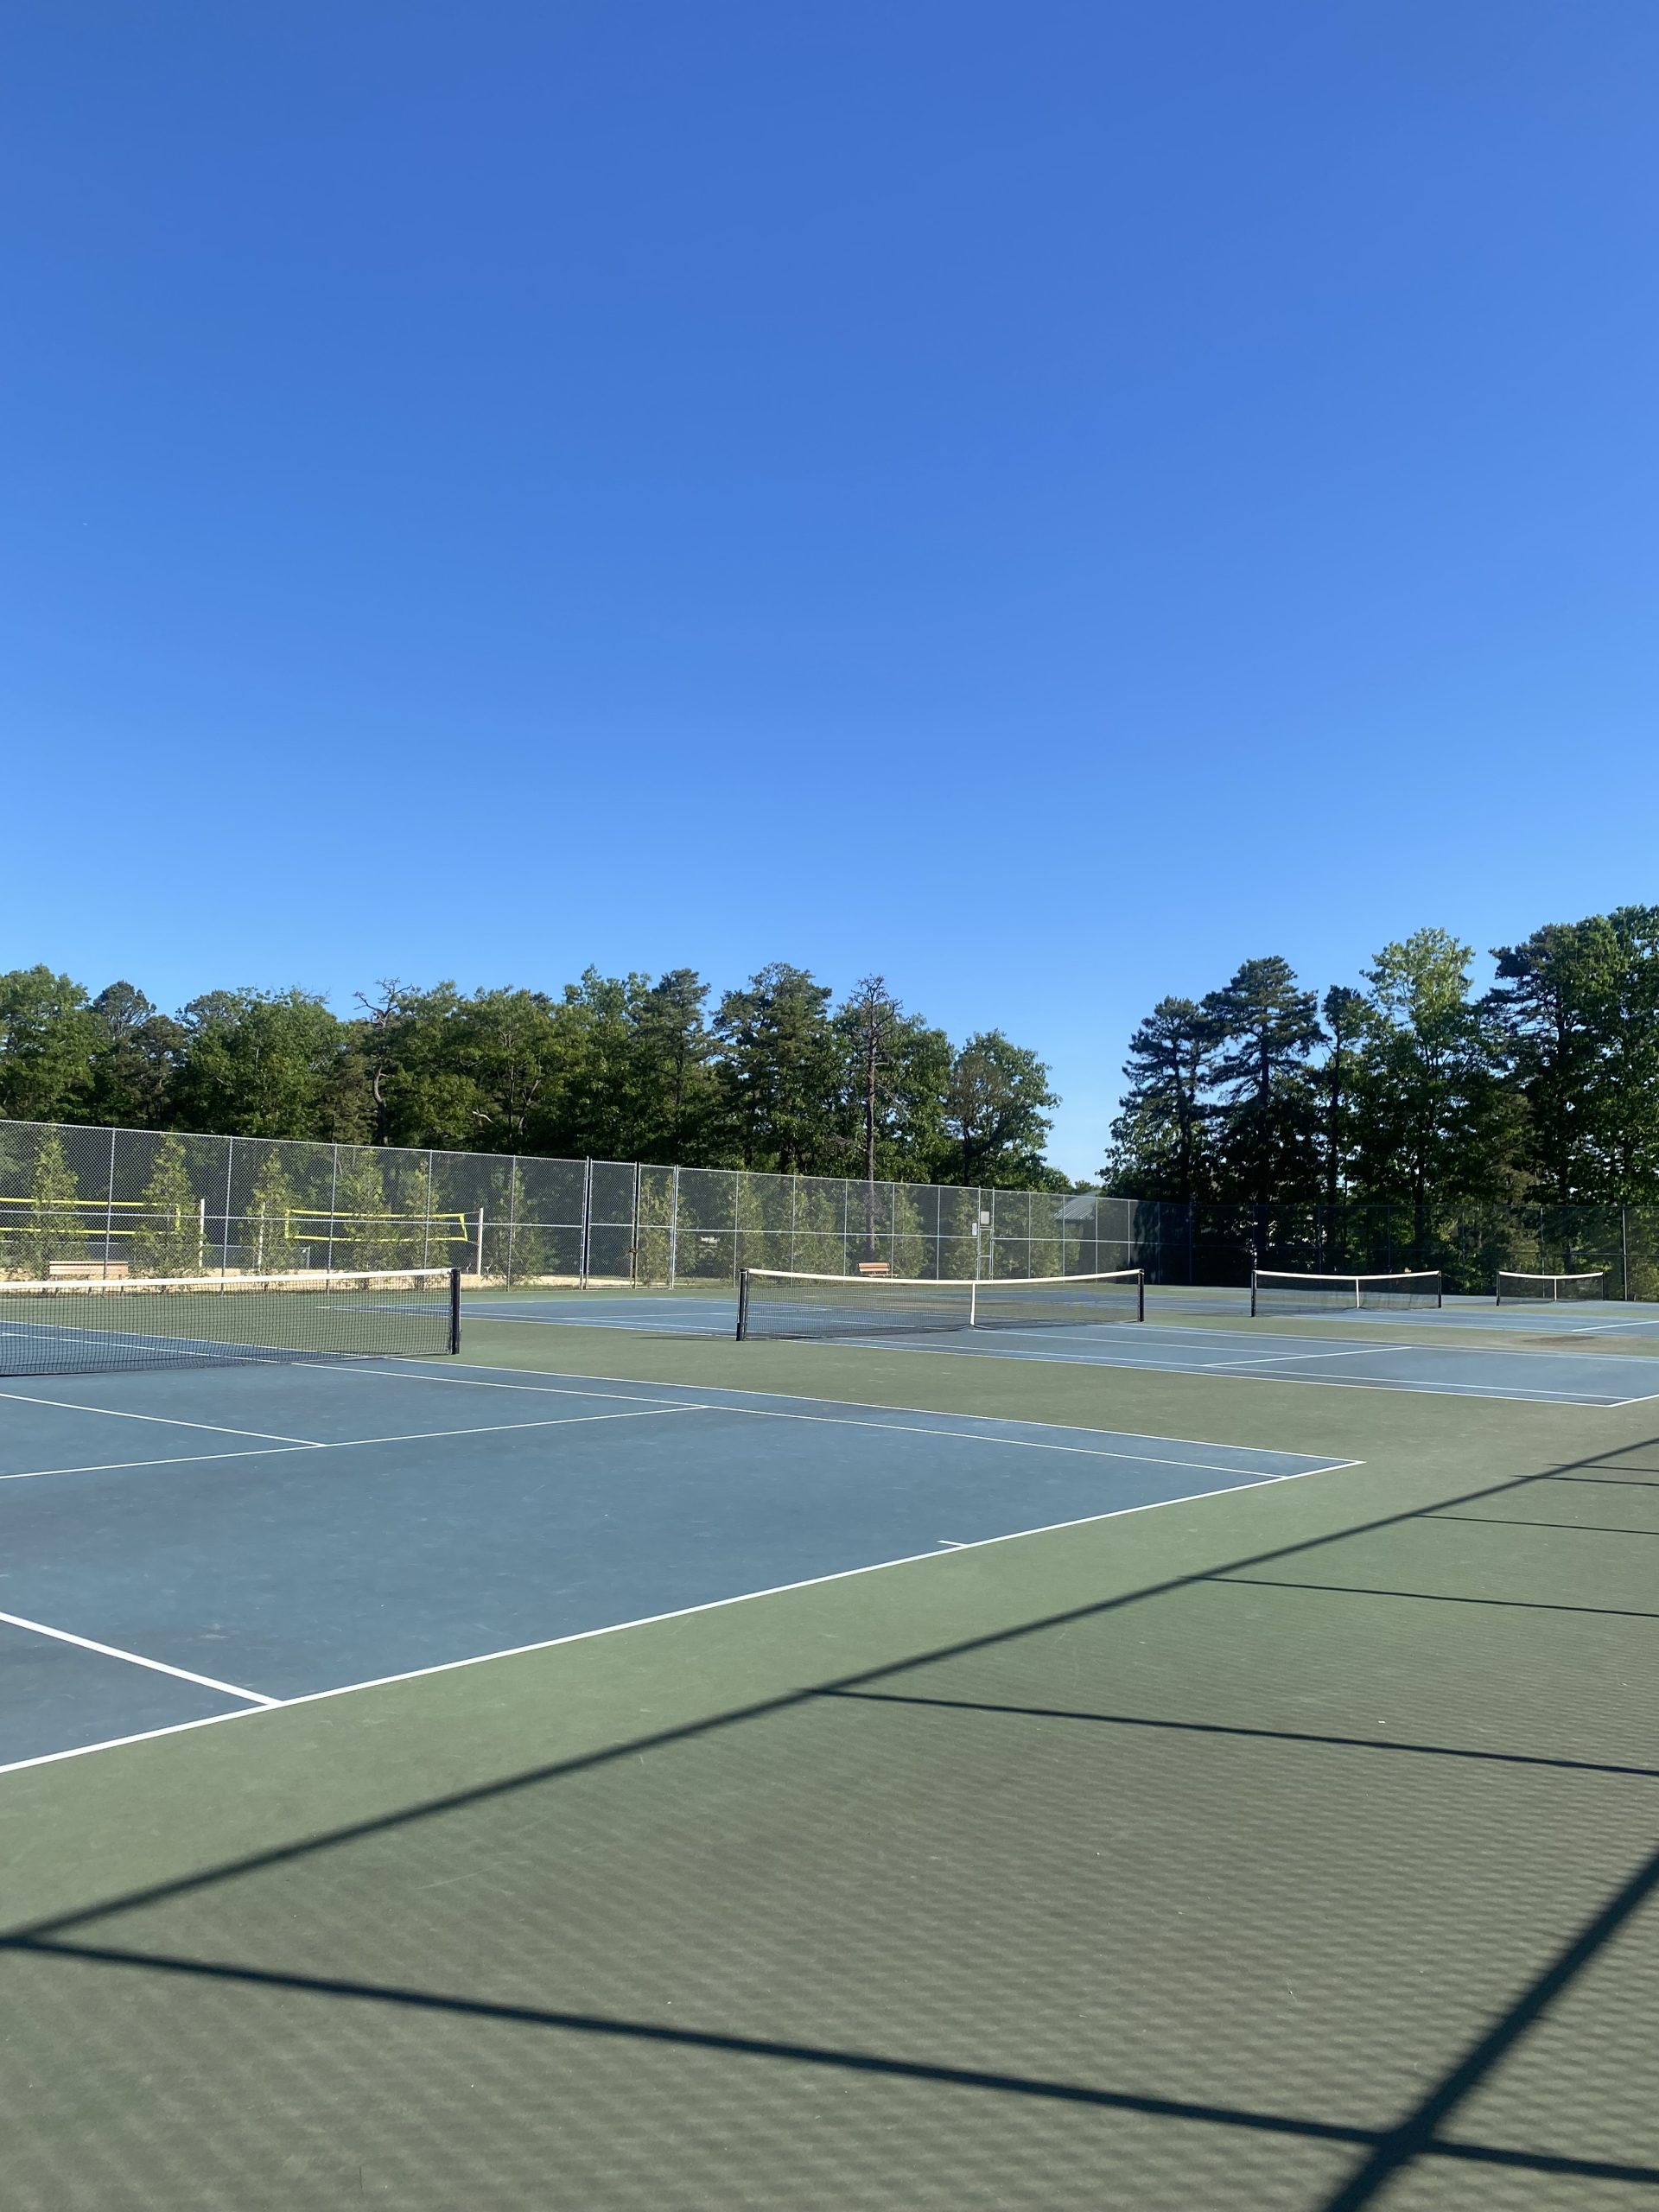 Tennis Courts at Tony Canale Park in Egg Harbor Township New Jersey